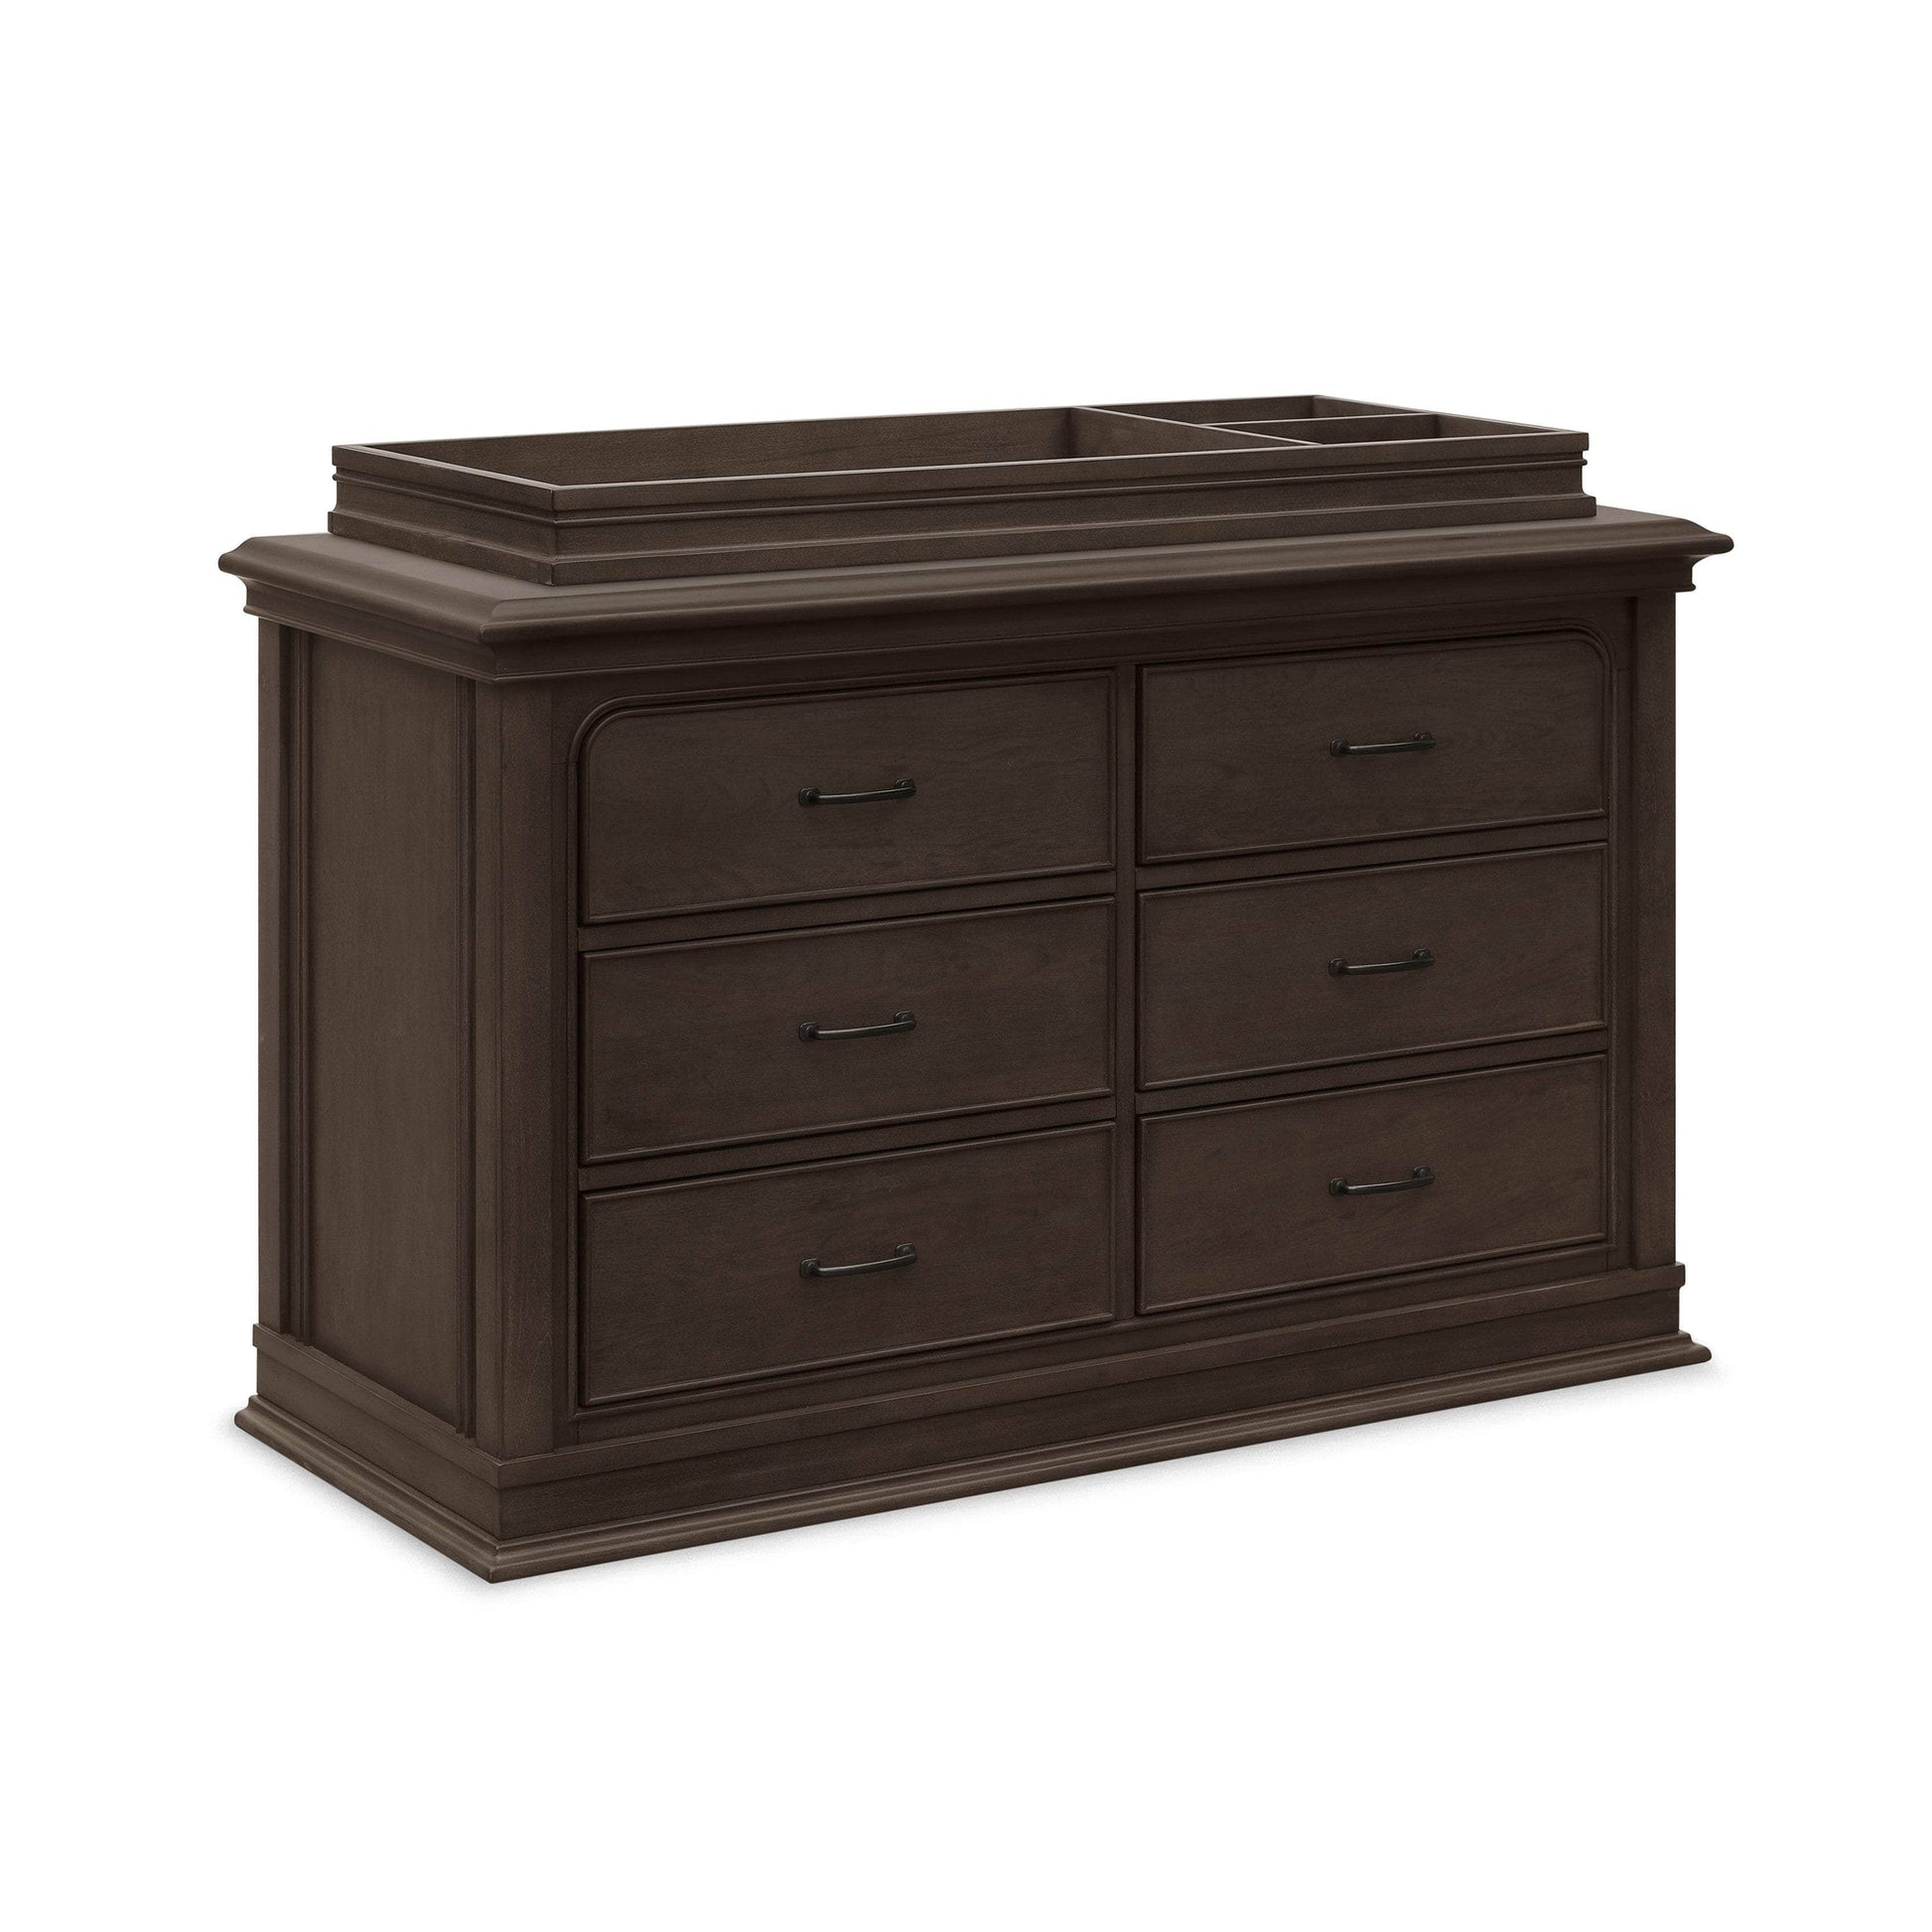 M20419BS,Rhodes Removable Changing Tray in Brownstone